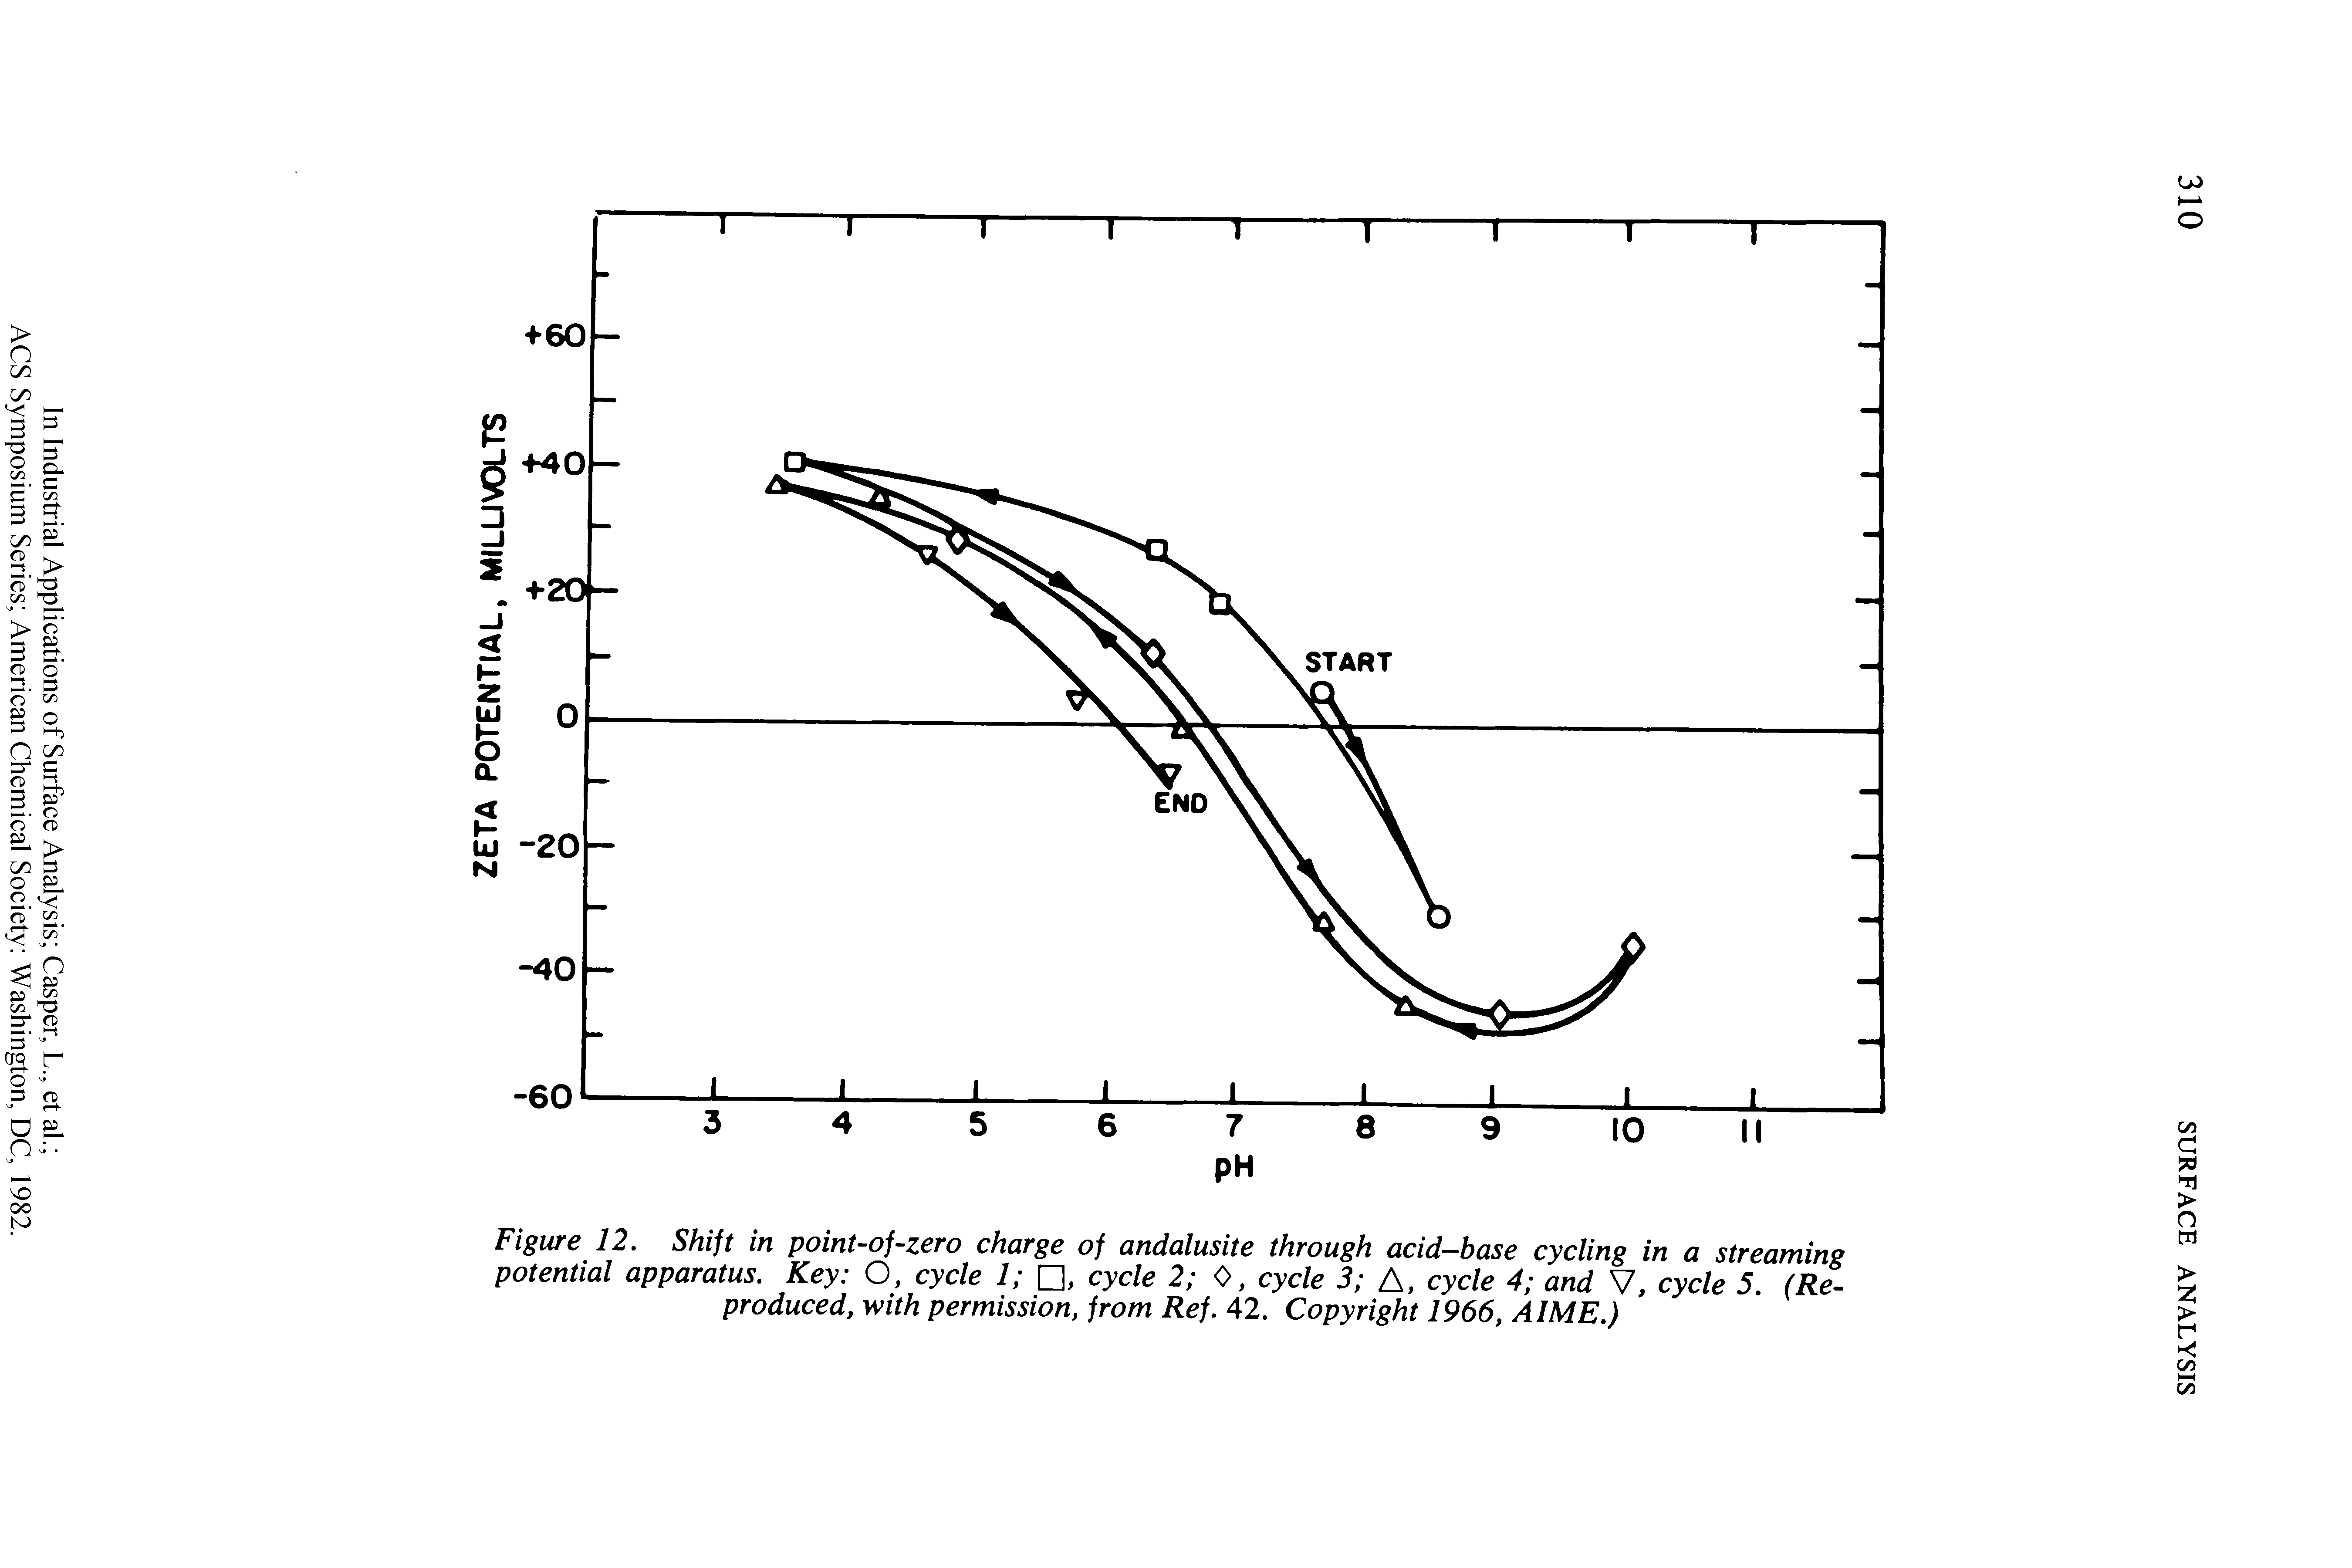 Figure 12. Shift in point-of-zero charge of andalusite through acid-base cycling in a streaming potential apparatus. Key O, cycle 1 , cycle 2 0, cycle 3 A, cycle 4 and V, cycle 5. (Reproduced, with permission, from Ref. 42. Copyright 1966, A1ME.)...